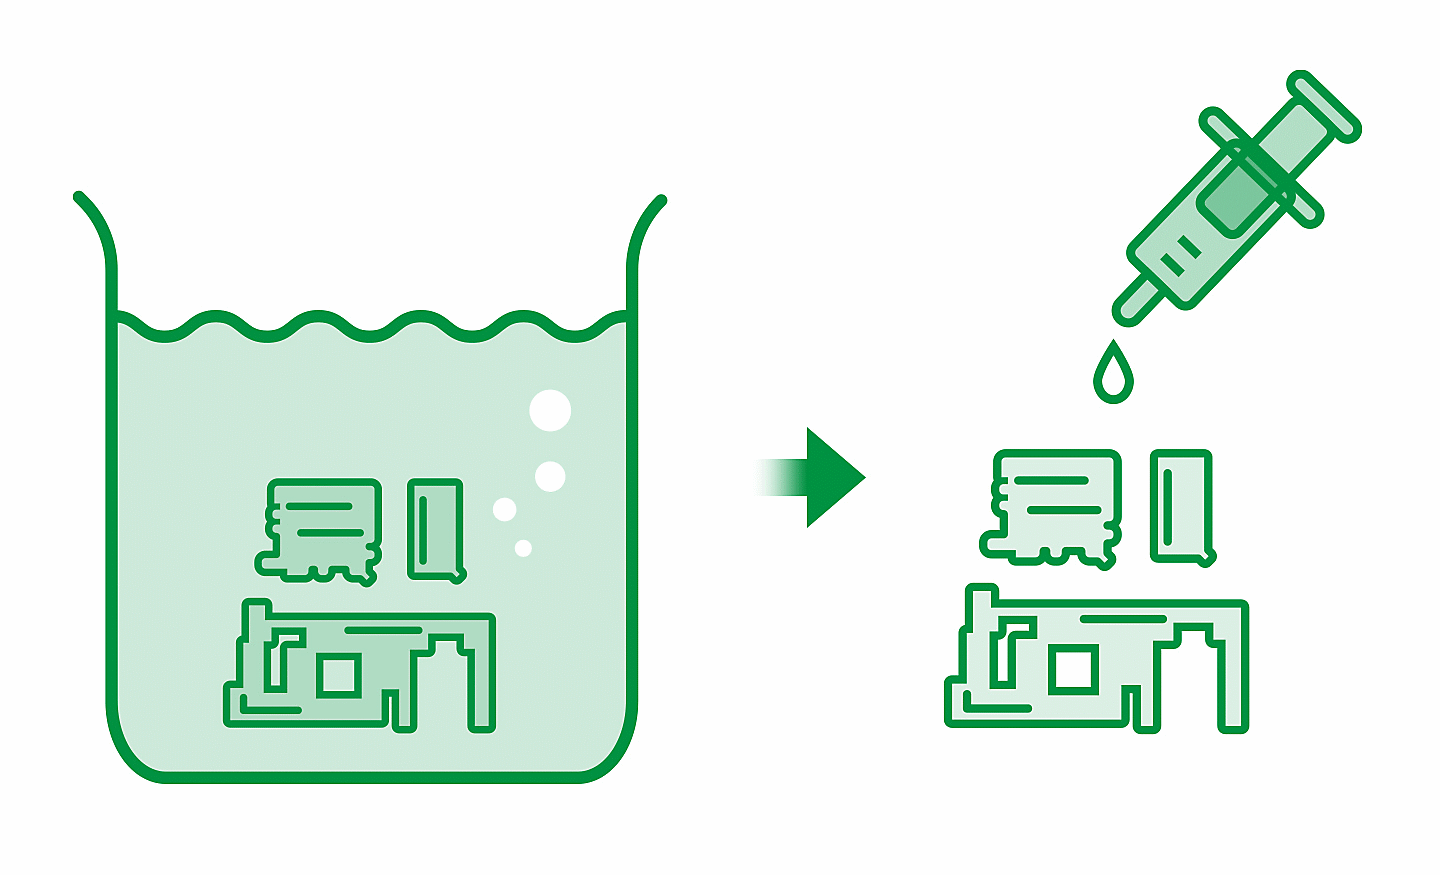 Diagram illustrating reduced use of chemical cleaners and solvents